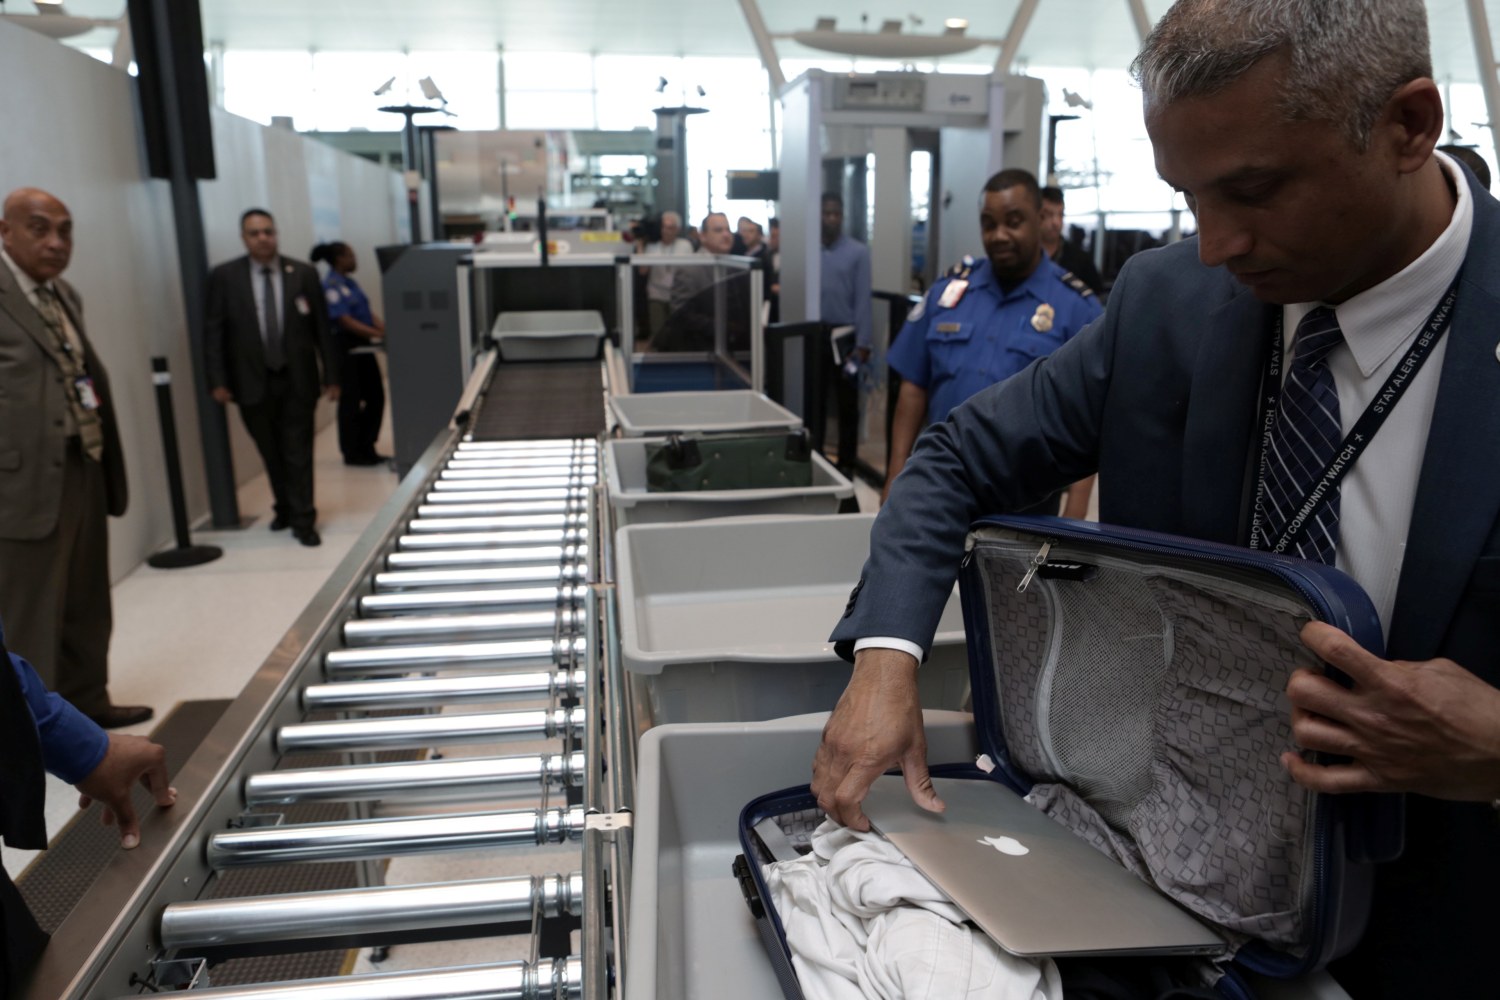 Laptops in Checked Bags Pose Fire and Explosion Risk, FAA Warns